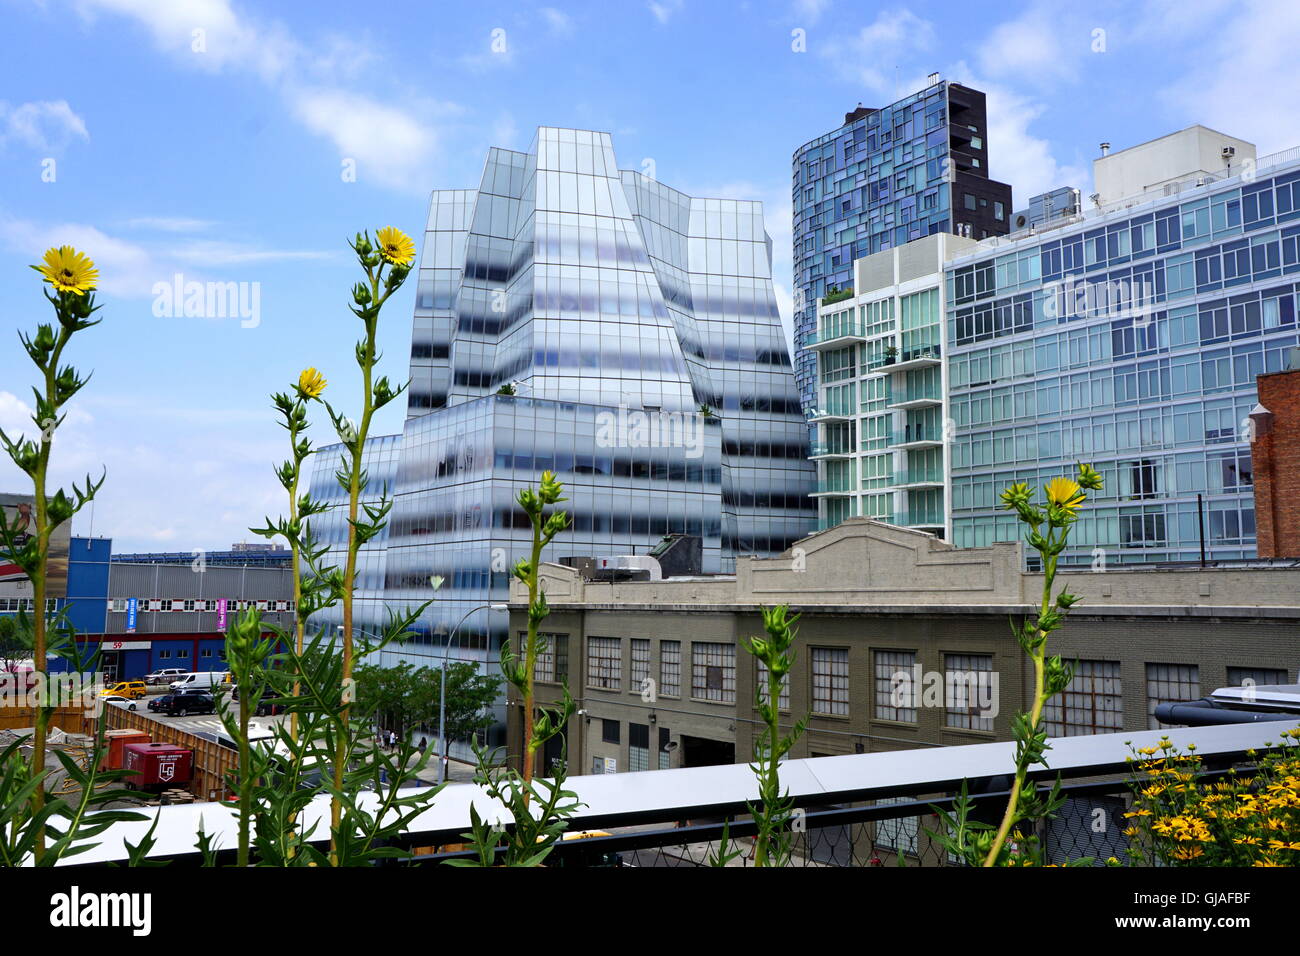 A view of the IAC (InterActive Corp) and 100 Eleventh Ave buildings from the High Line in the Chelsea area in New York City, NY Stock Photo